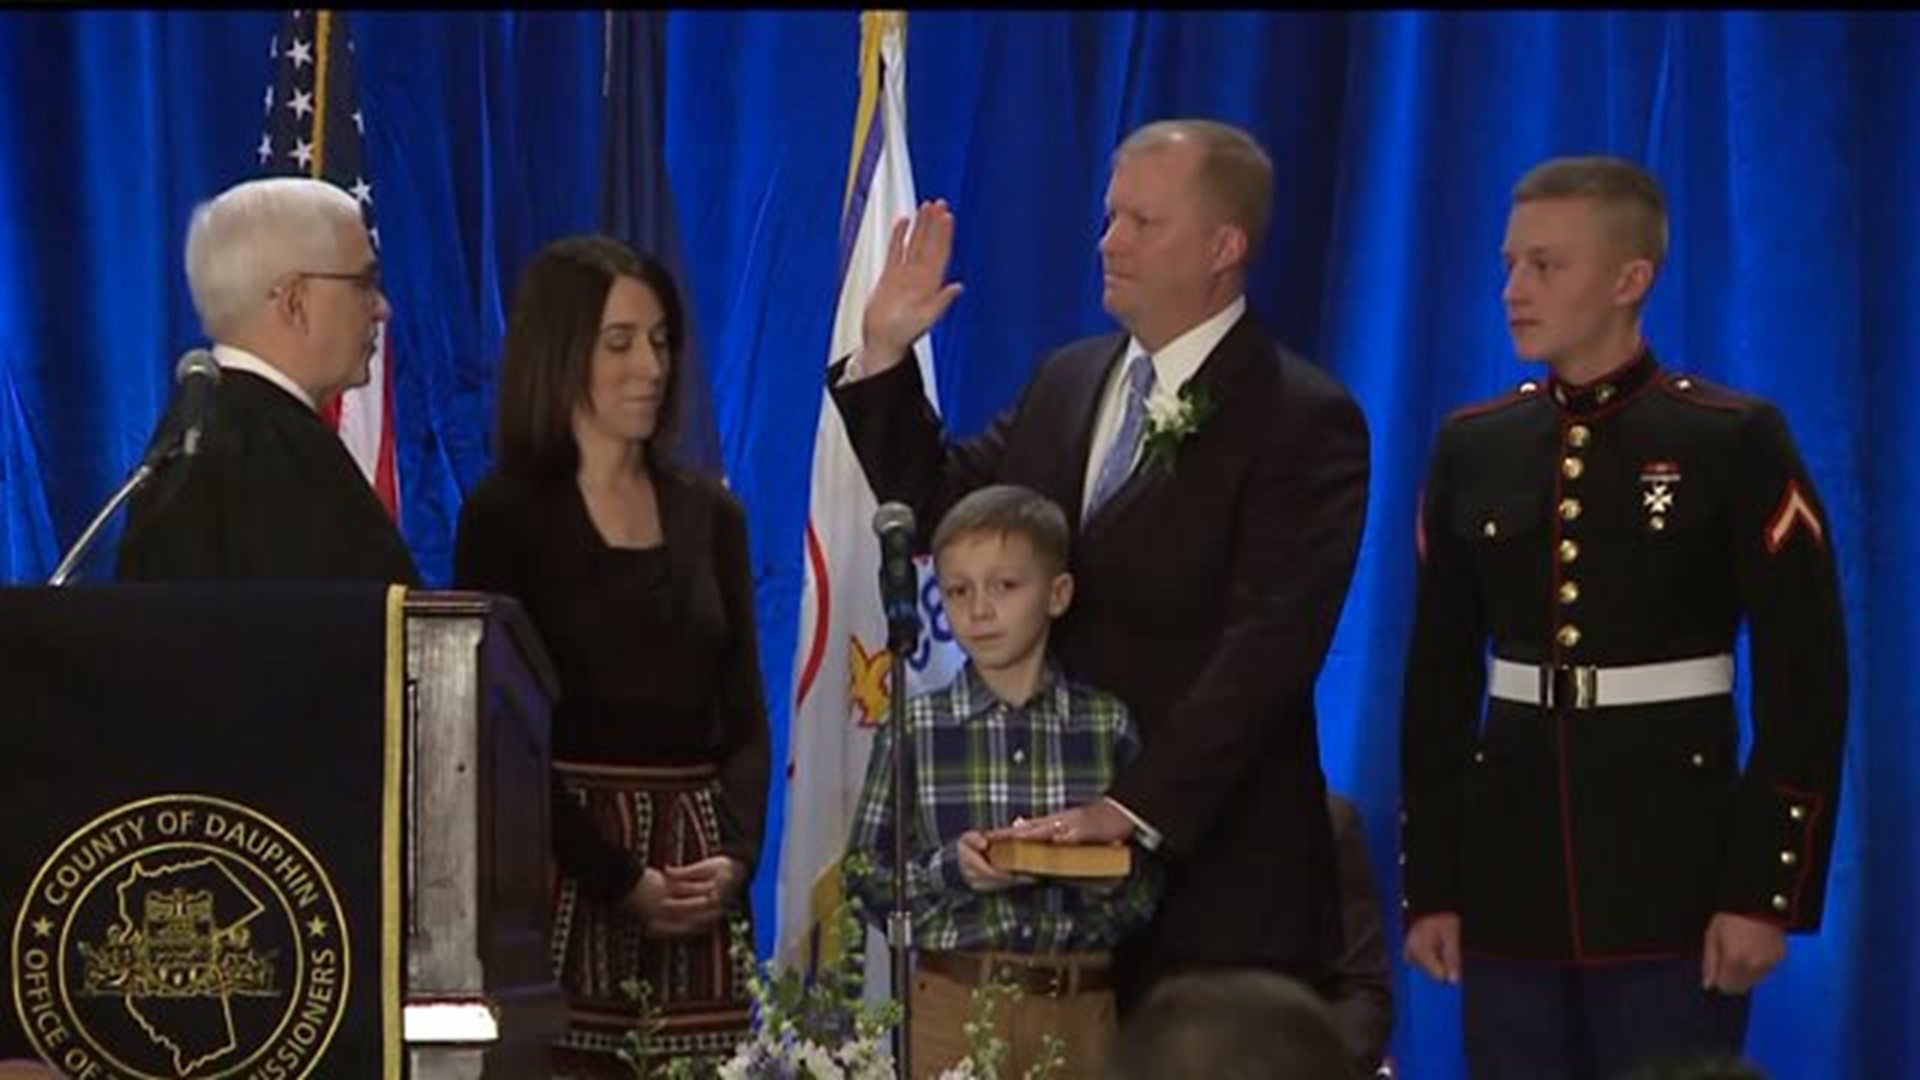 Dauphin County commissioners sworn in at downtown ceremony fox43 com